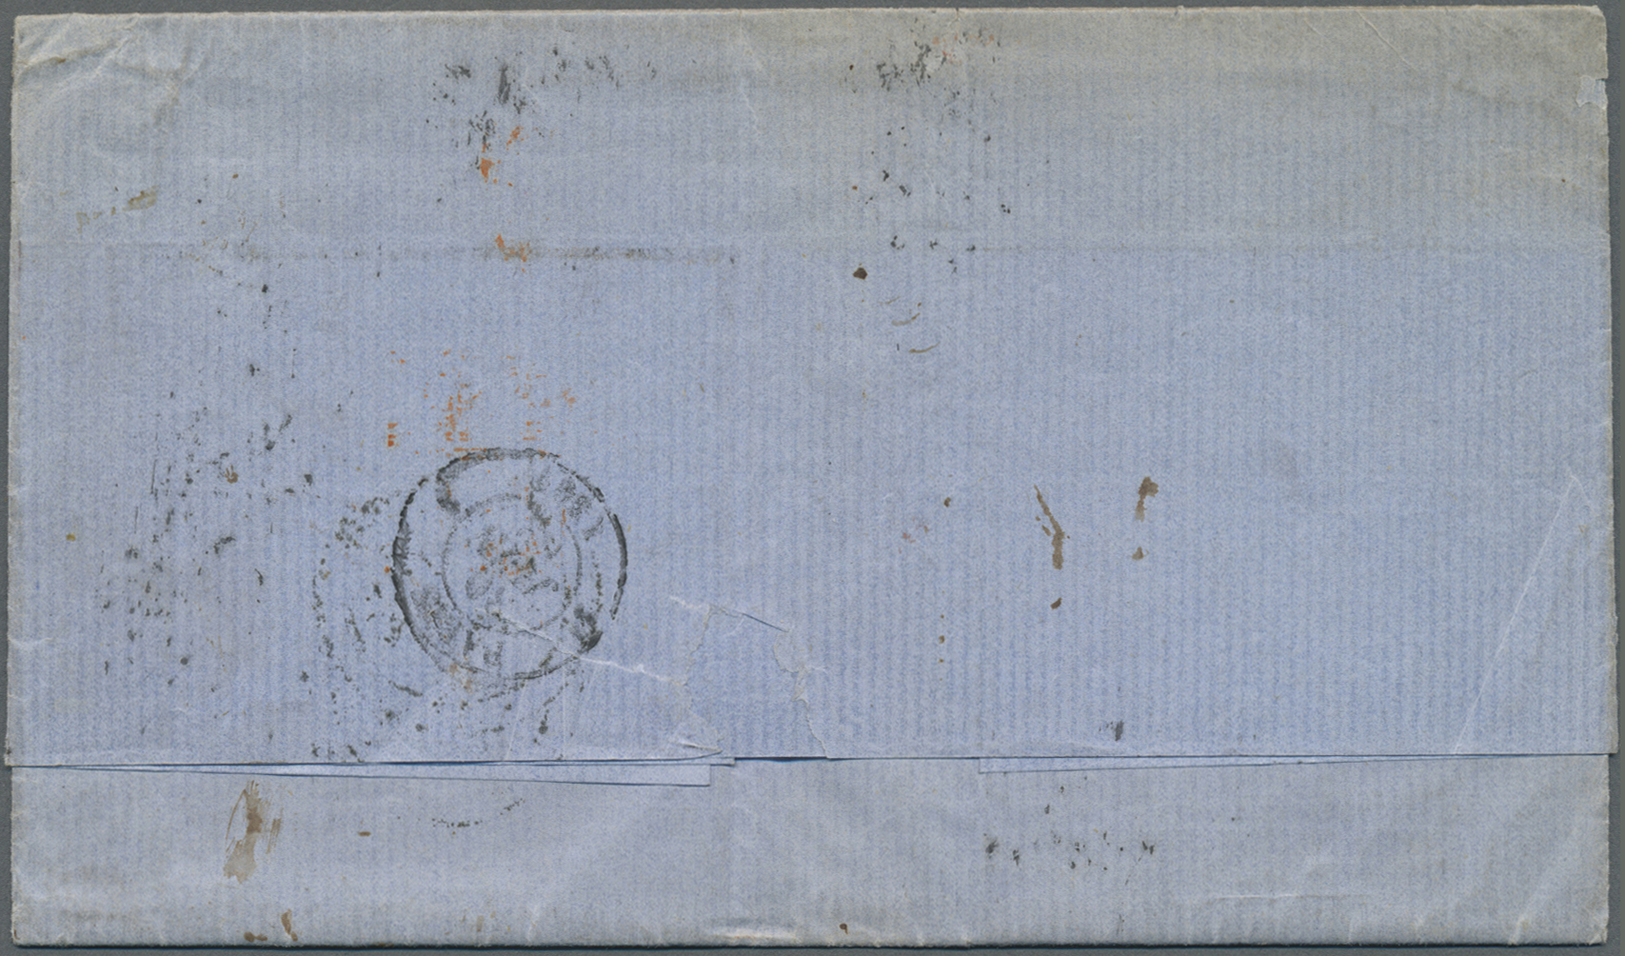 Br Frankreich: 1863, 80c. Rose "Empire Nd", Three Copies On Lettersheet With Complete Message (written In Spanish - Used Stamps